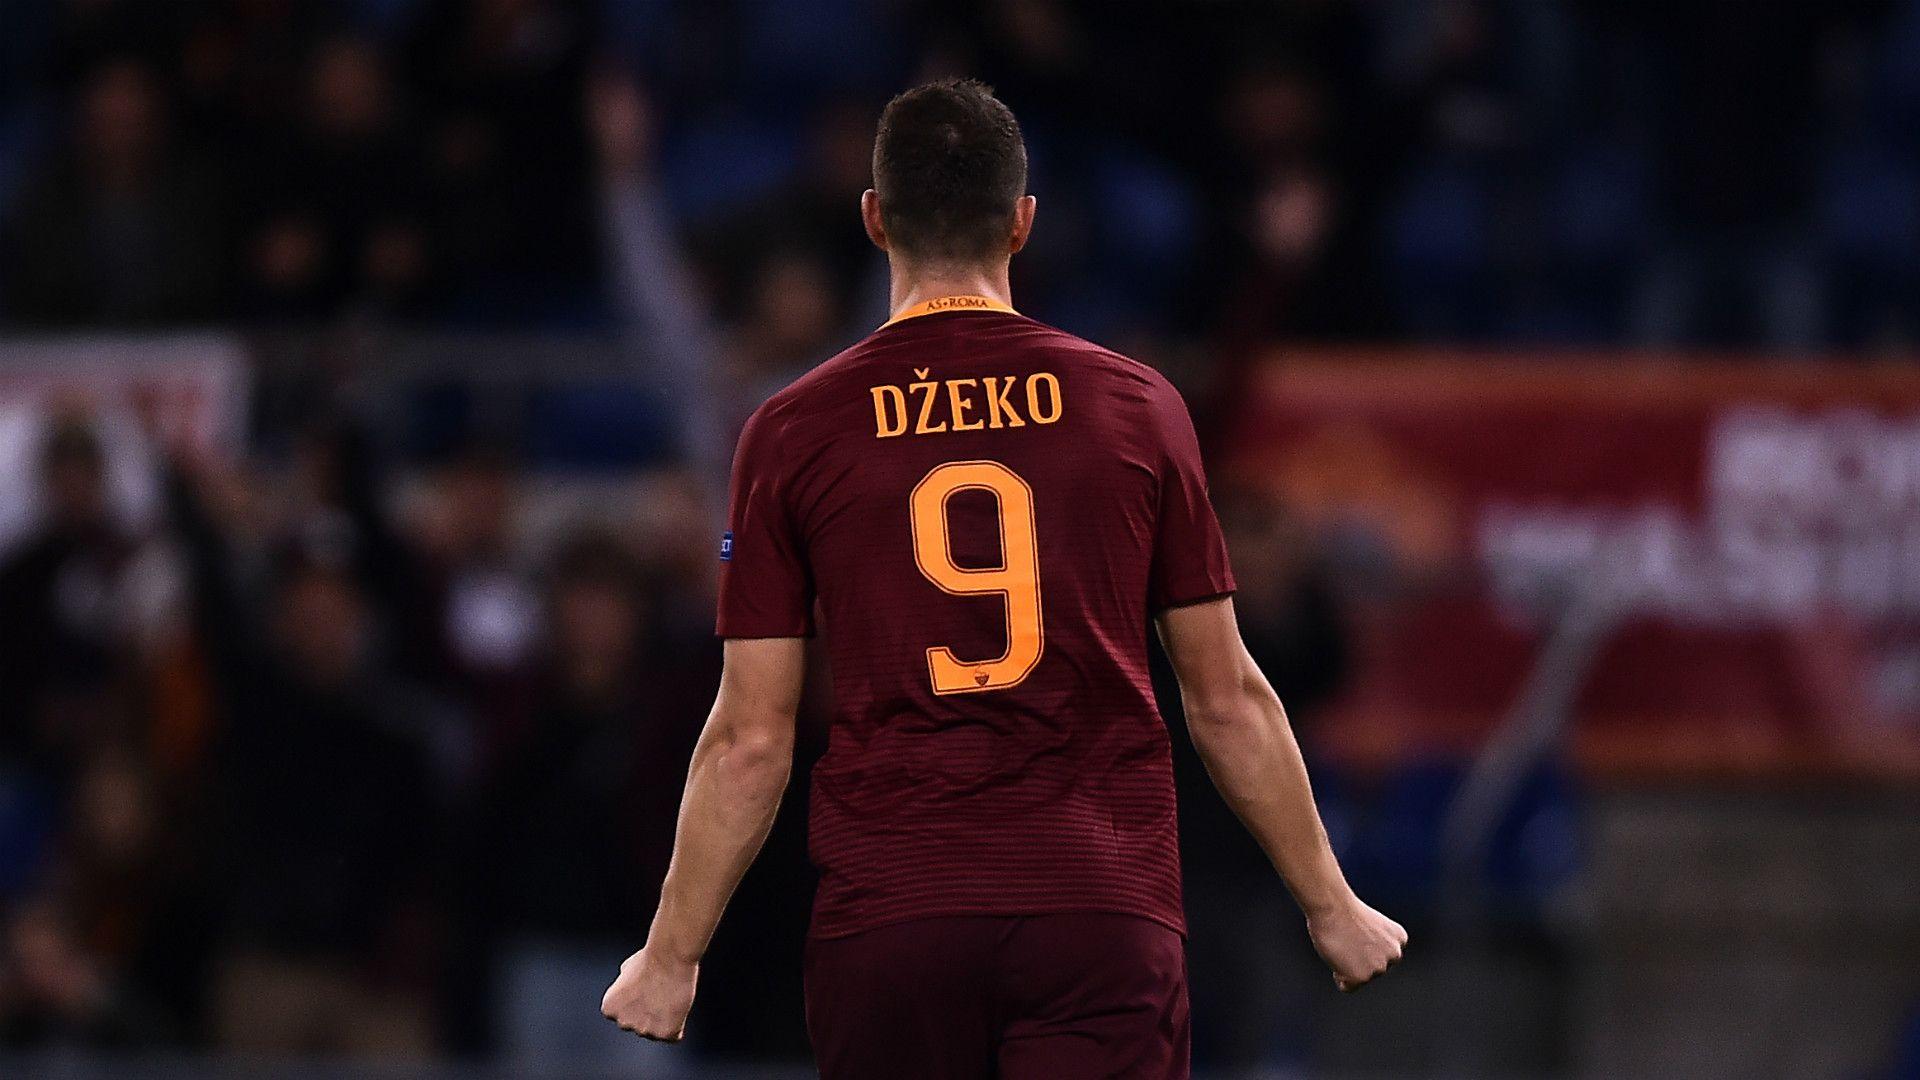 Serie A: Dzeko feels Roma fans are waiting with insults